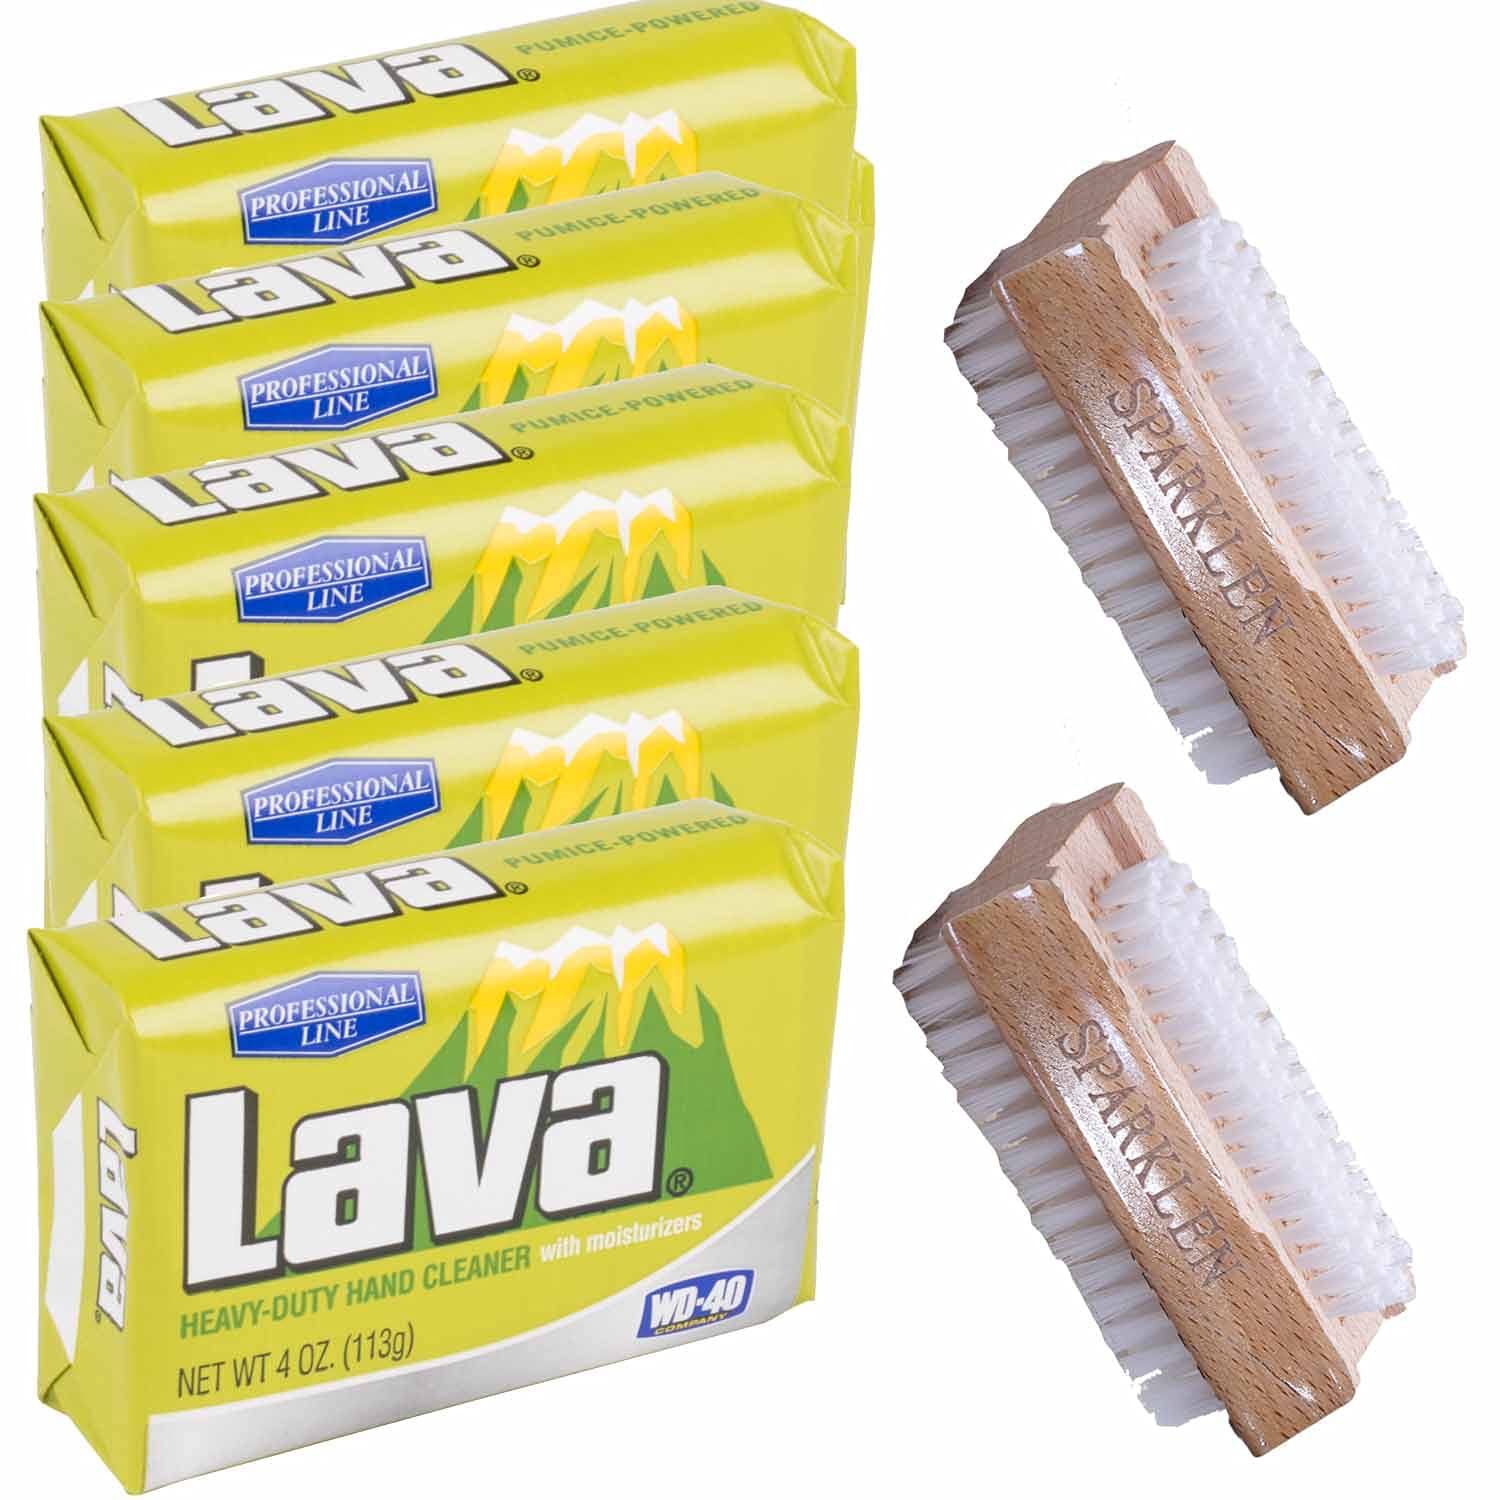 Tatane Lava Heavy-Duty Hand Cleaner Pumice soap with Moisturizers  (Professional Line) 5-Bars 4 OZ Each with 2 Sparklen Wooden Nail Brushes